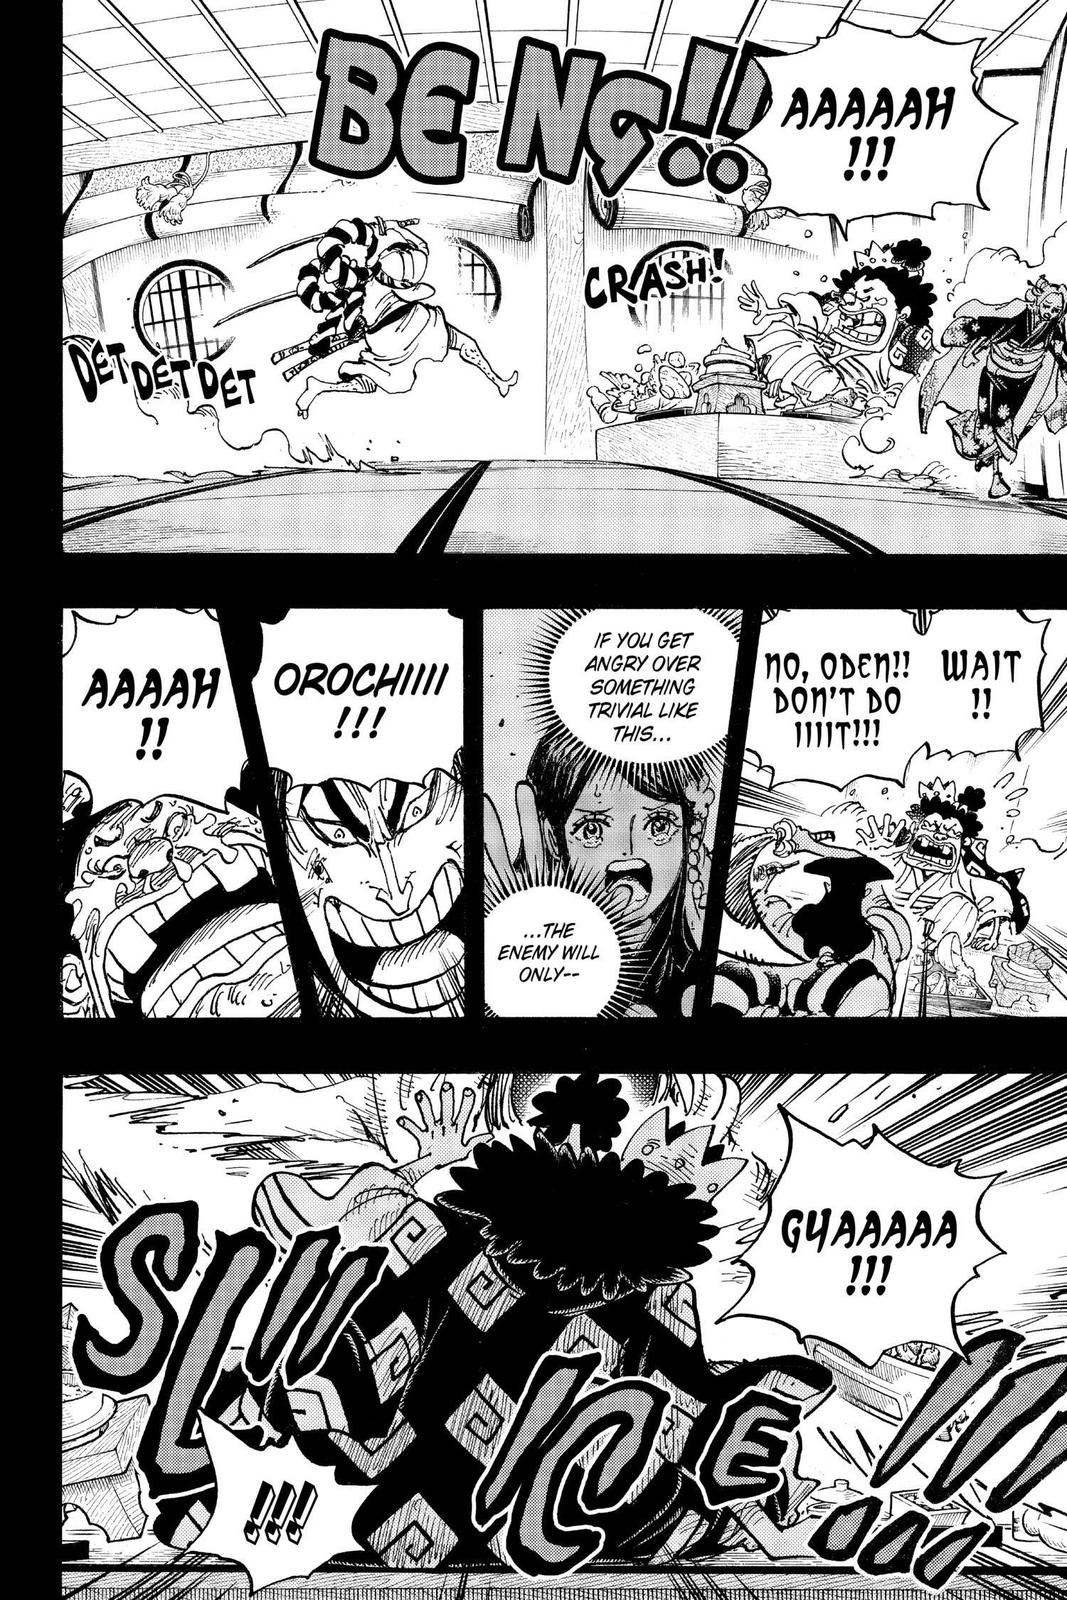 One Piece Chapter 969 One Piece Manga Online